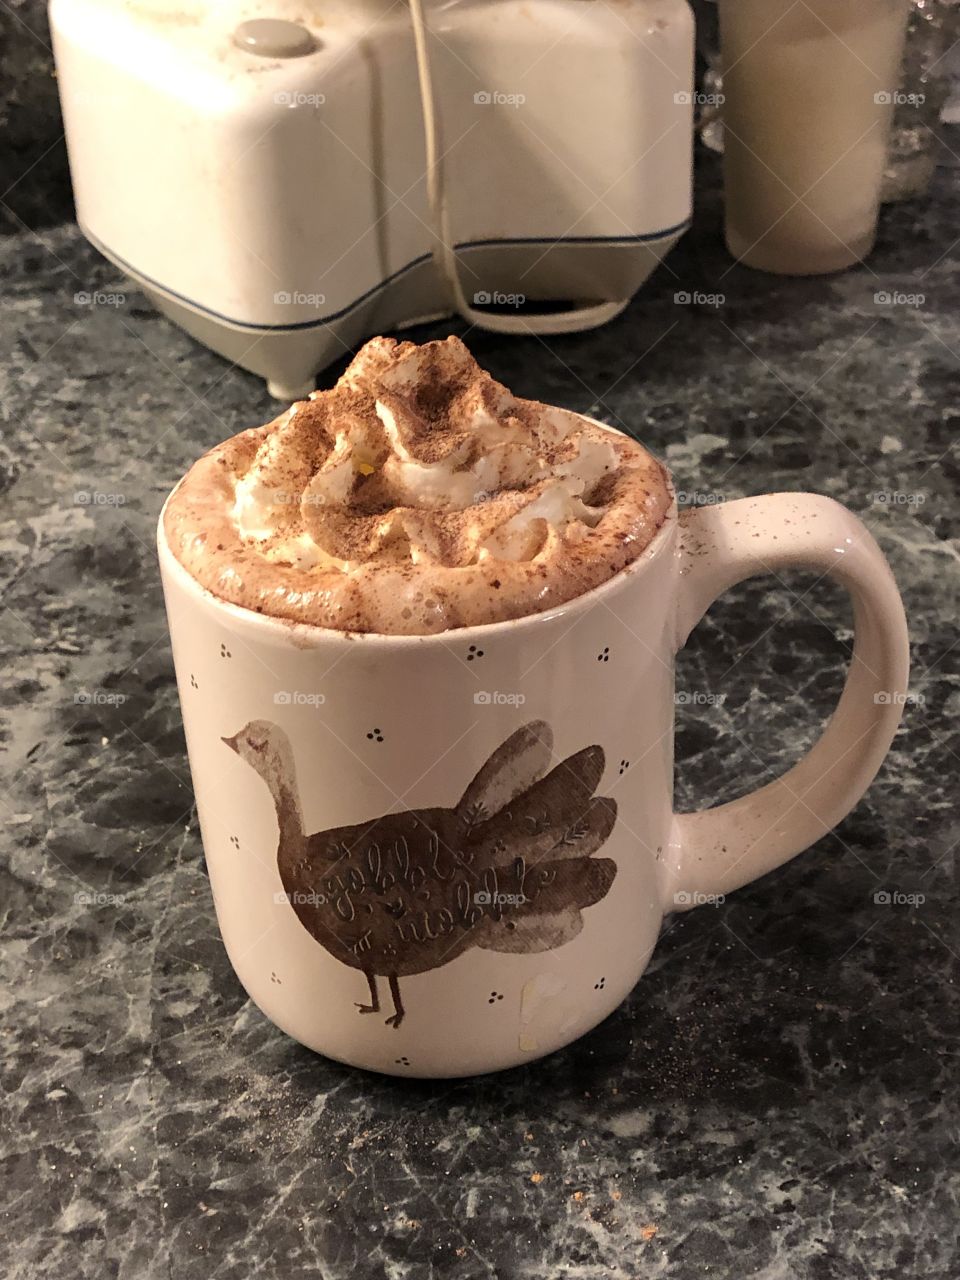 Spiced mocha hot chocolate with whip cream on top sprinkled with cinnamon and nutmeg